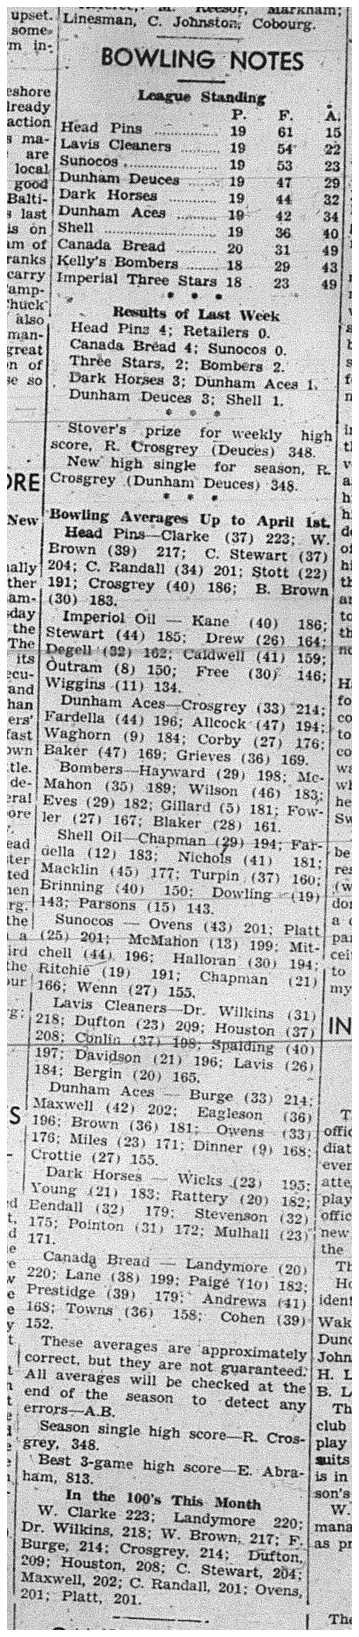 1940-04-04 Bowling -Averages & Standings